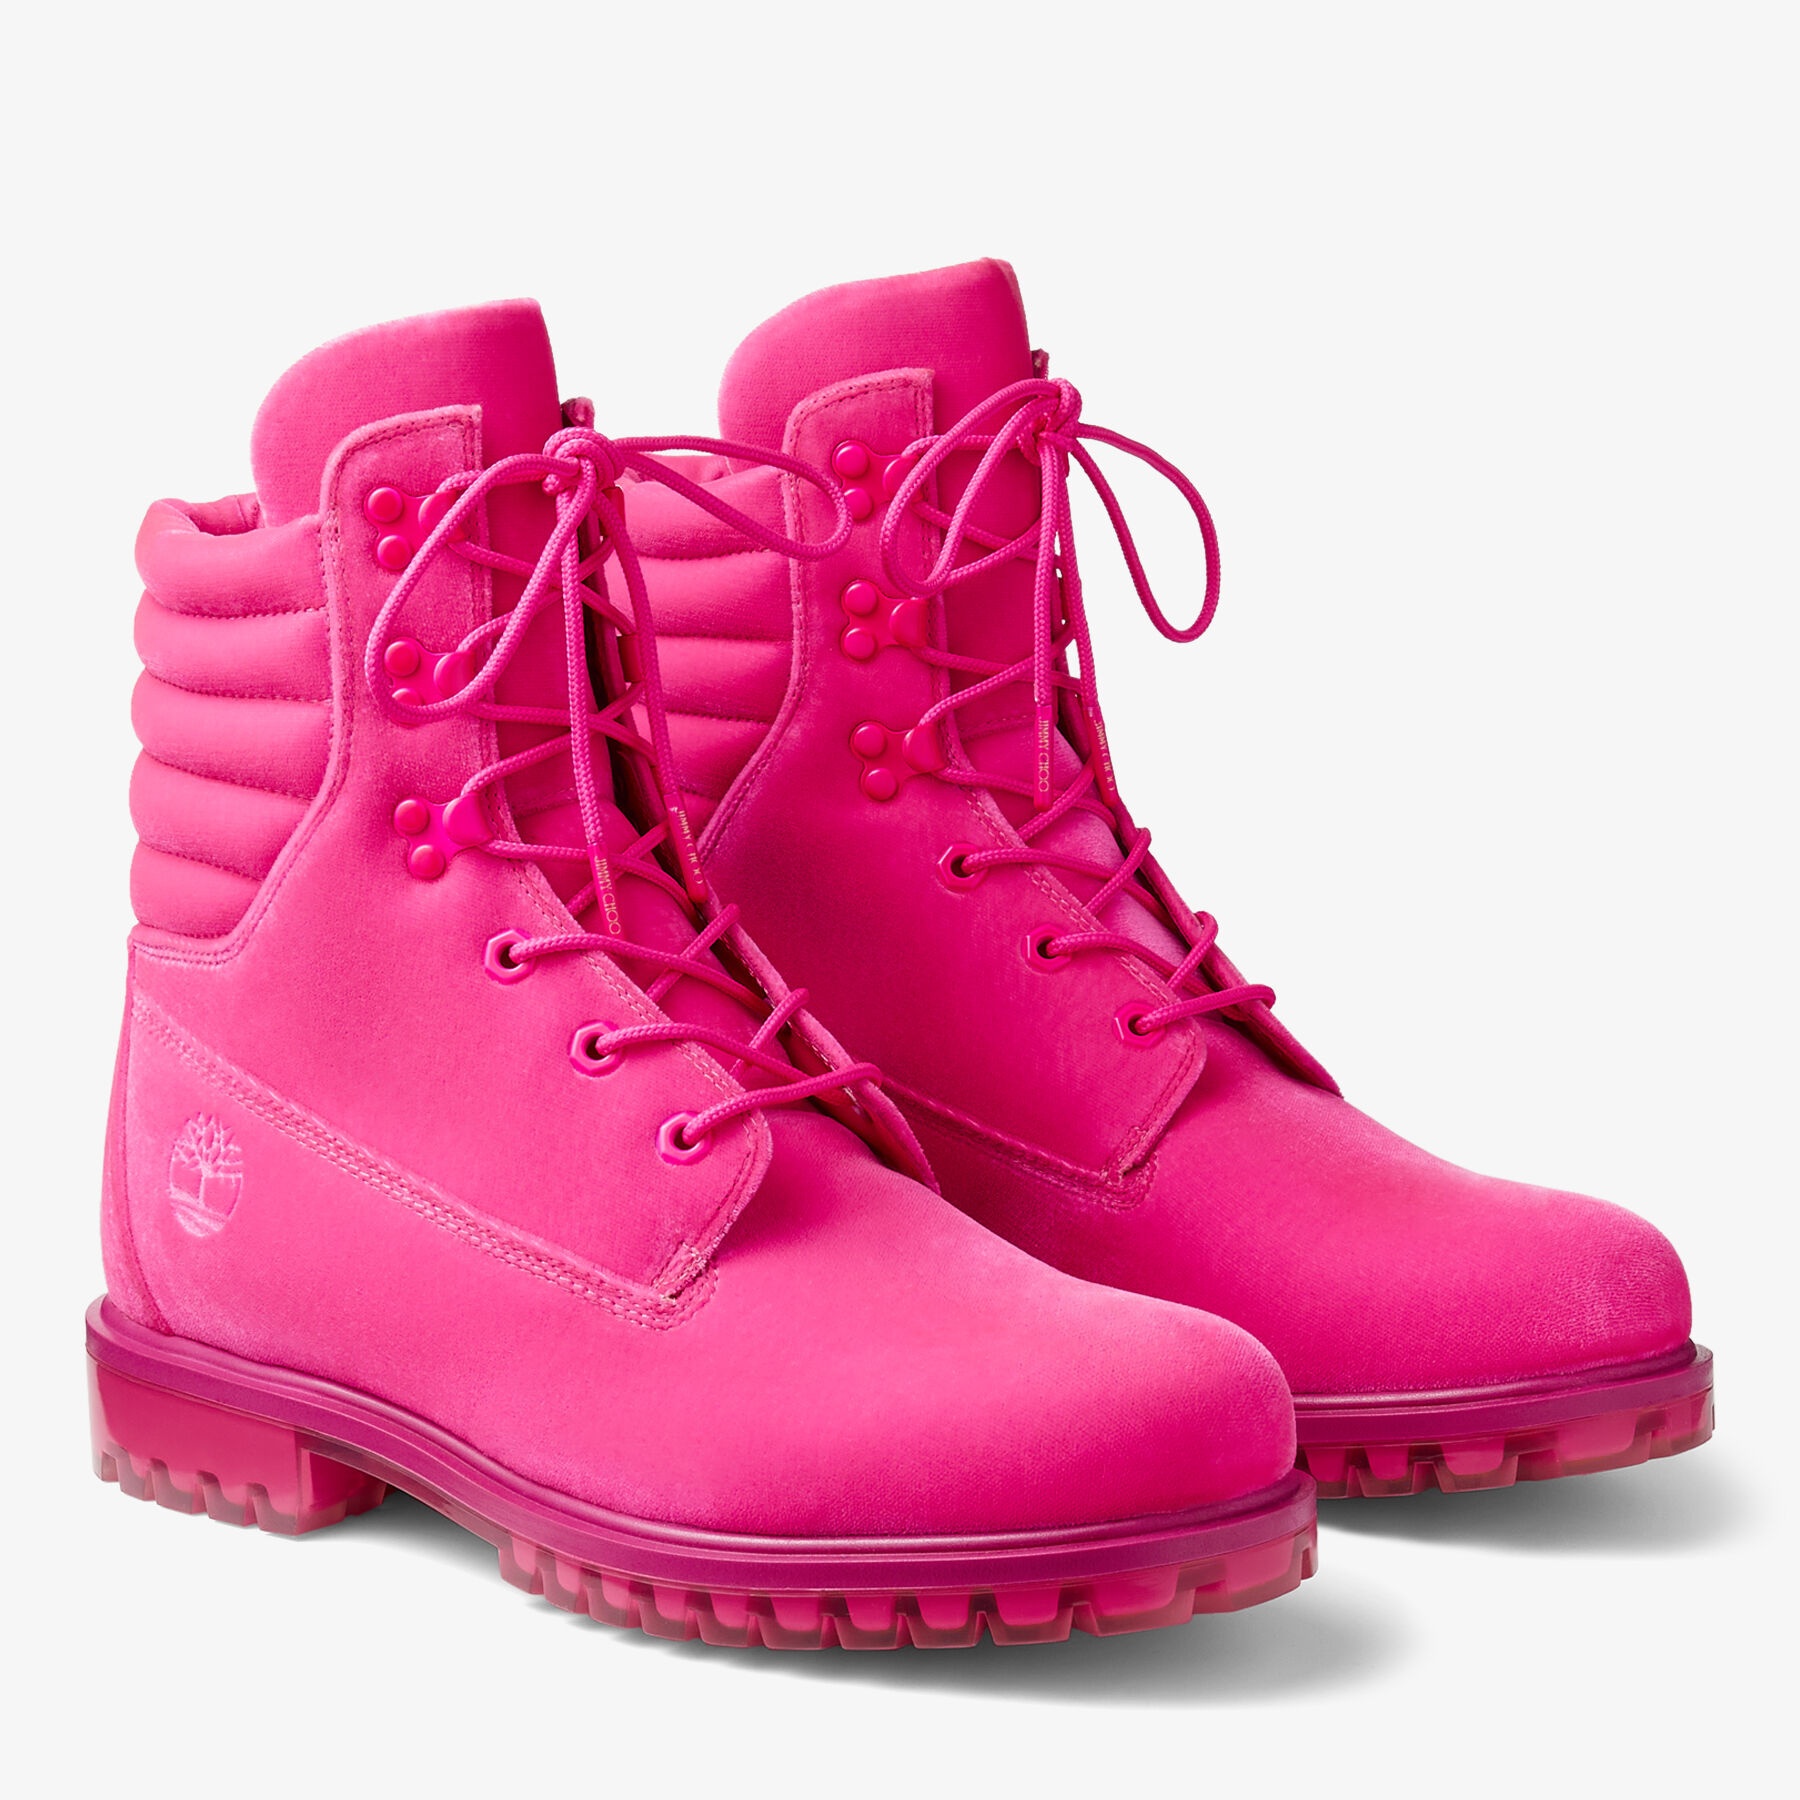 JIMMY CHOO X TIMBERLAND 8 INCH PUFFER BOOT
Hot Pink Timberland Velvet Ankle Boots - 2